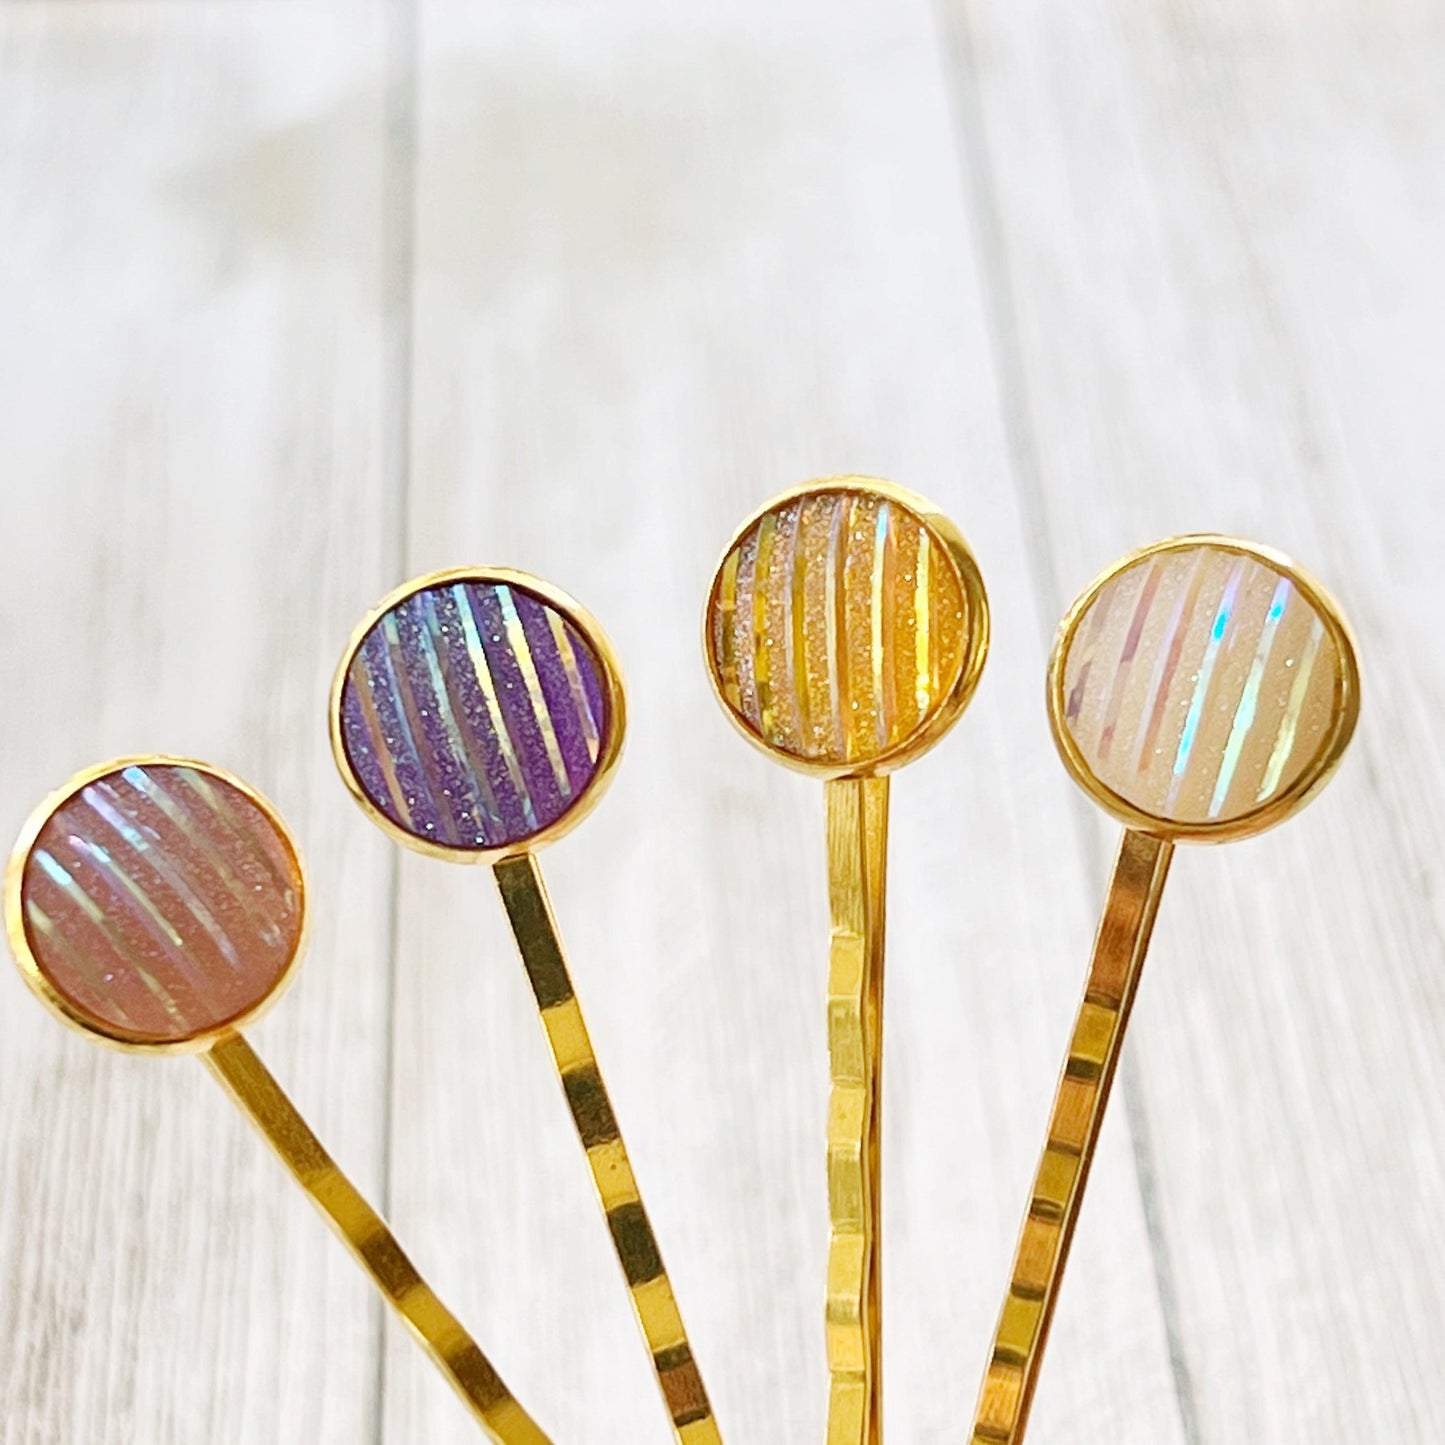 Set of 4 Gold-Toned Hair Pins: Vibrant Accents in Purple, Yellow, Pink, & White Striped Glitter Design